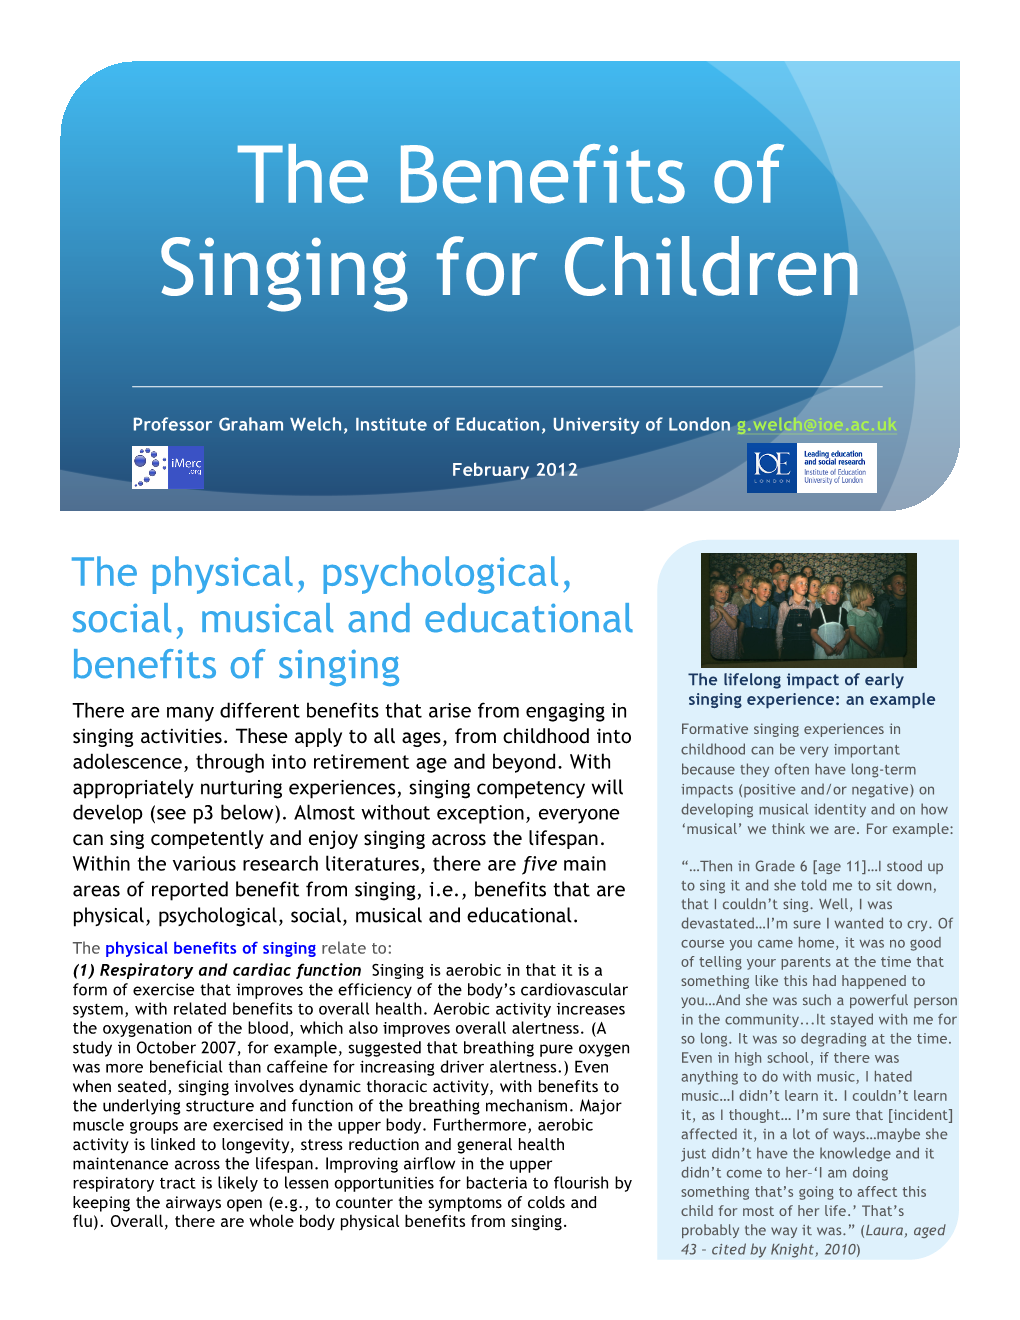 The Benefits of Singing for Children